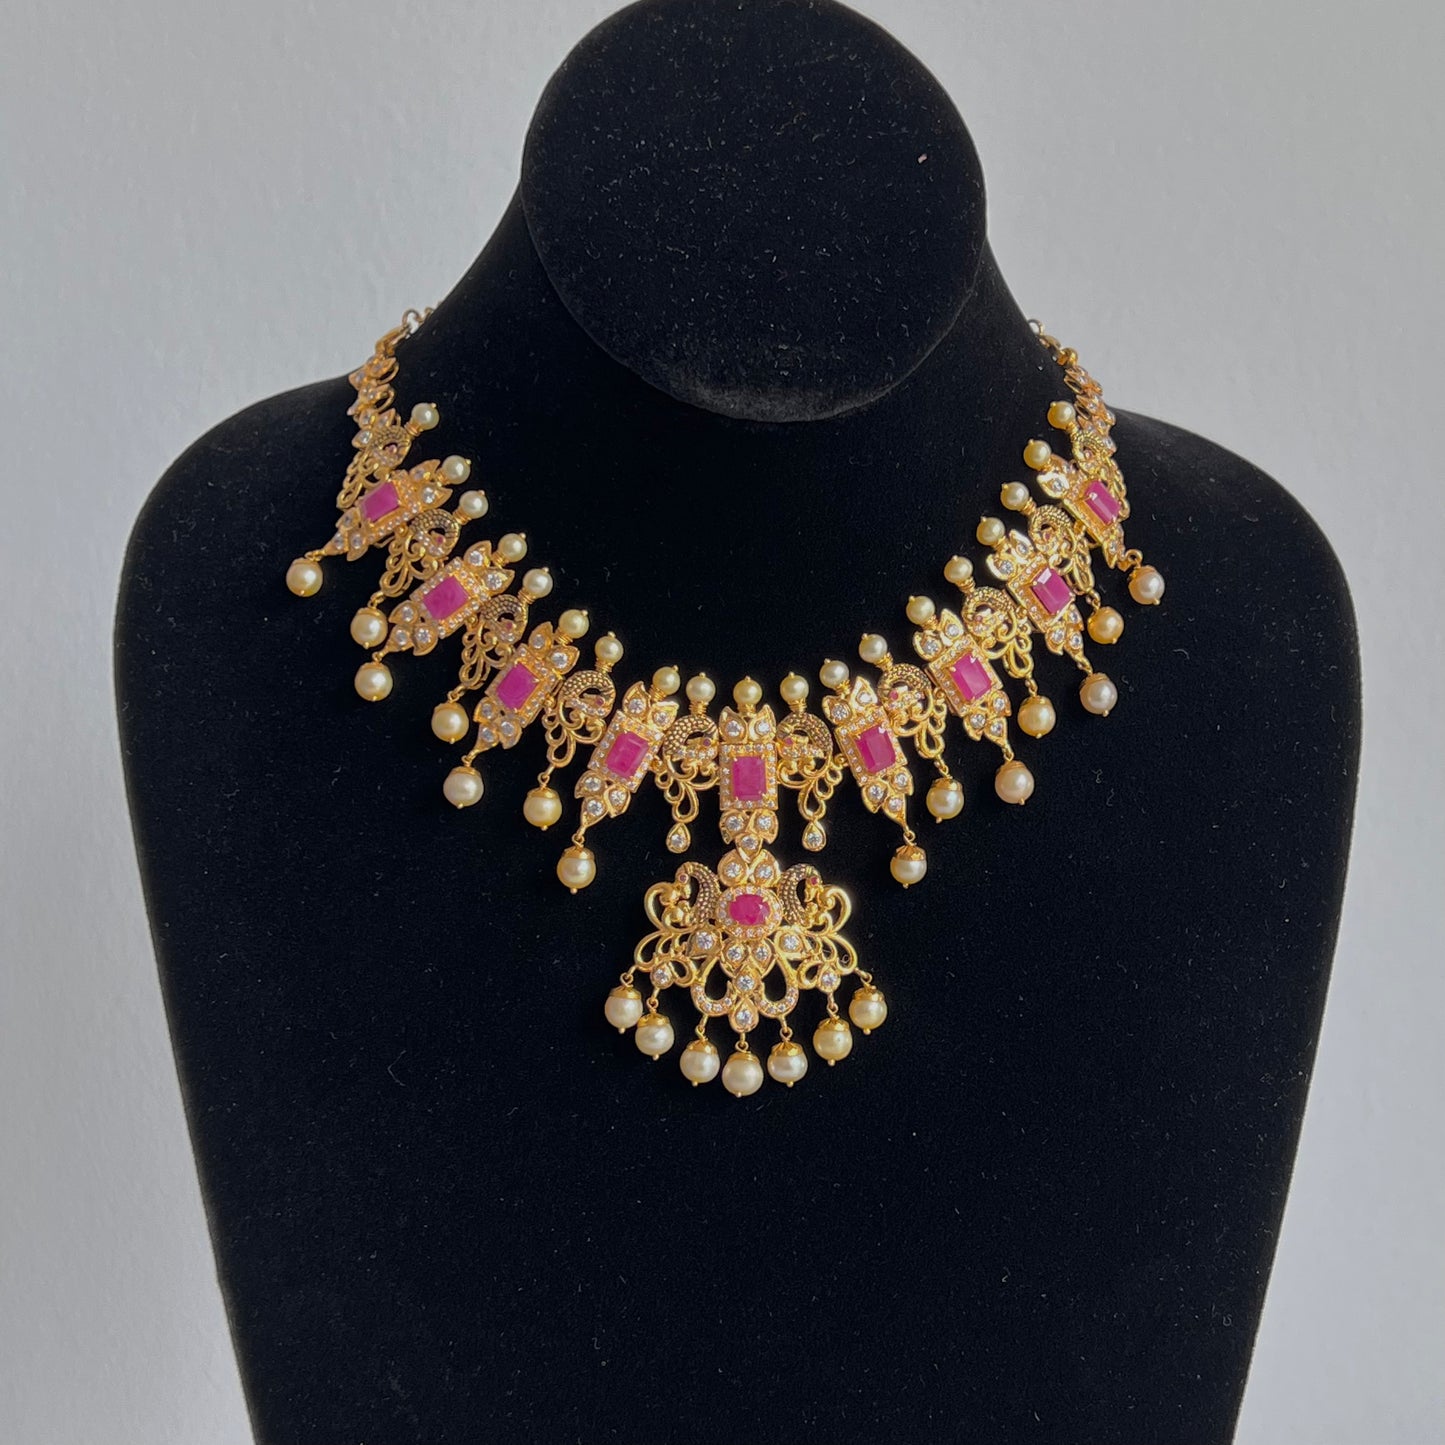 Glamorous Ruby and Cubic Zirconia Necklace Set with Hanging Seawater Pearls